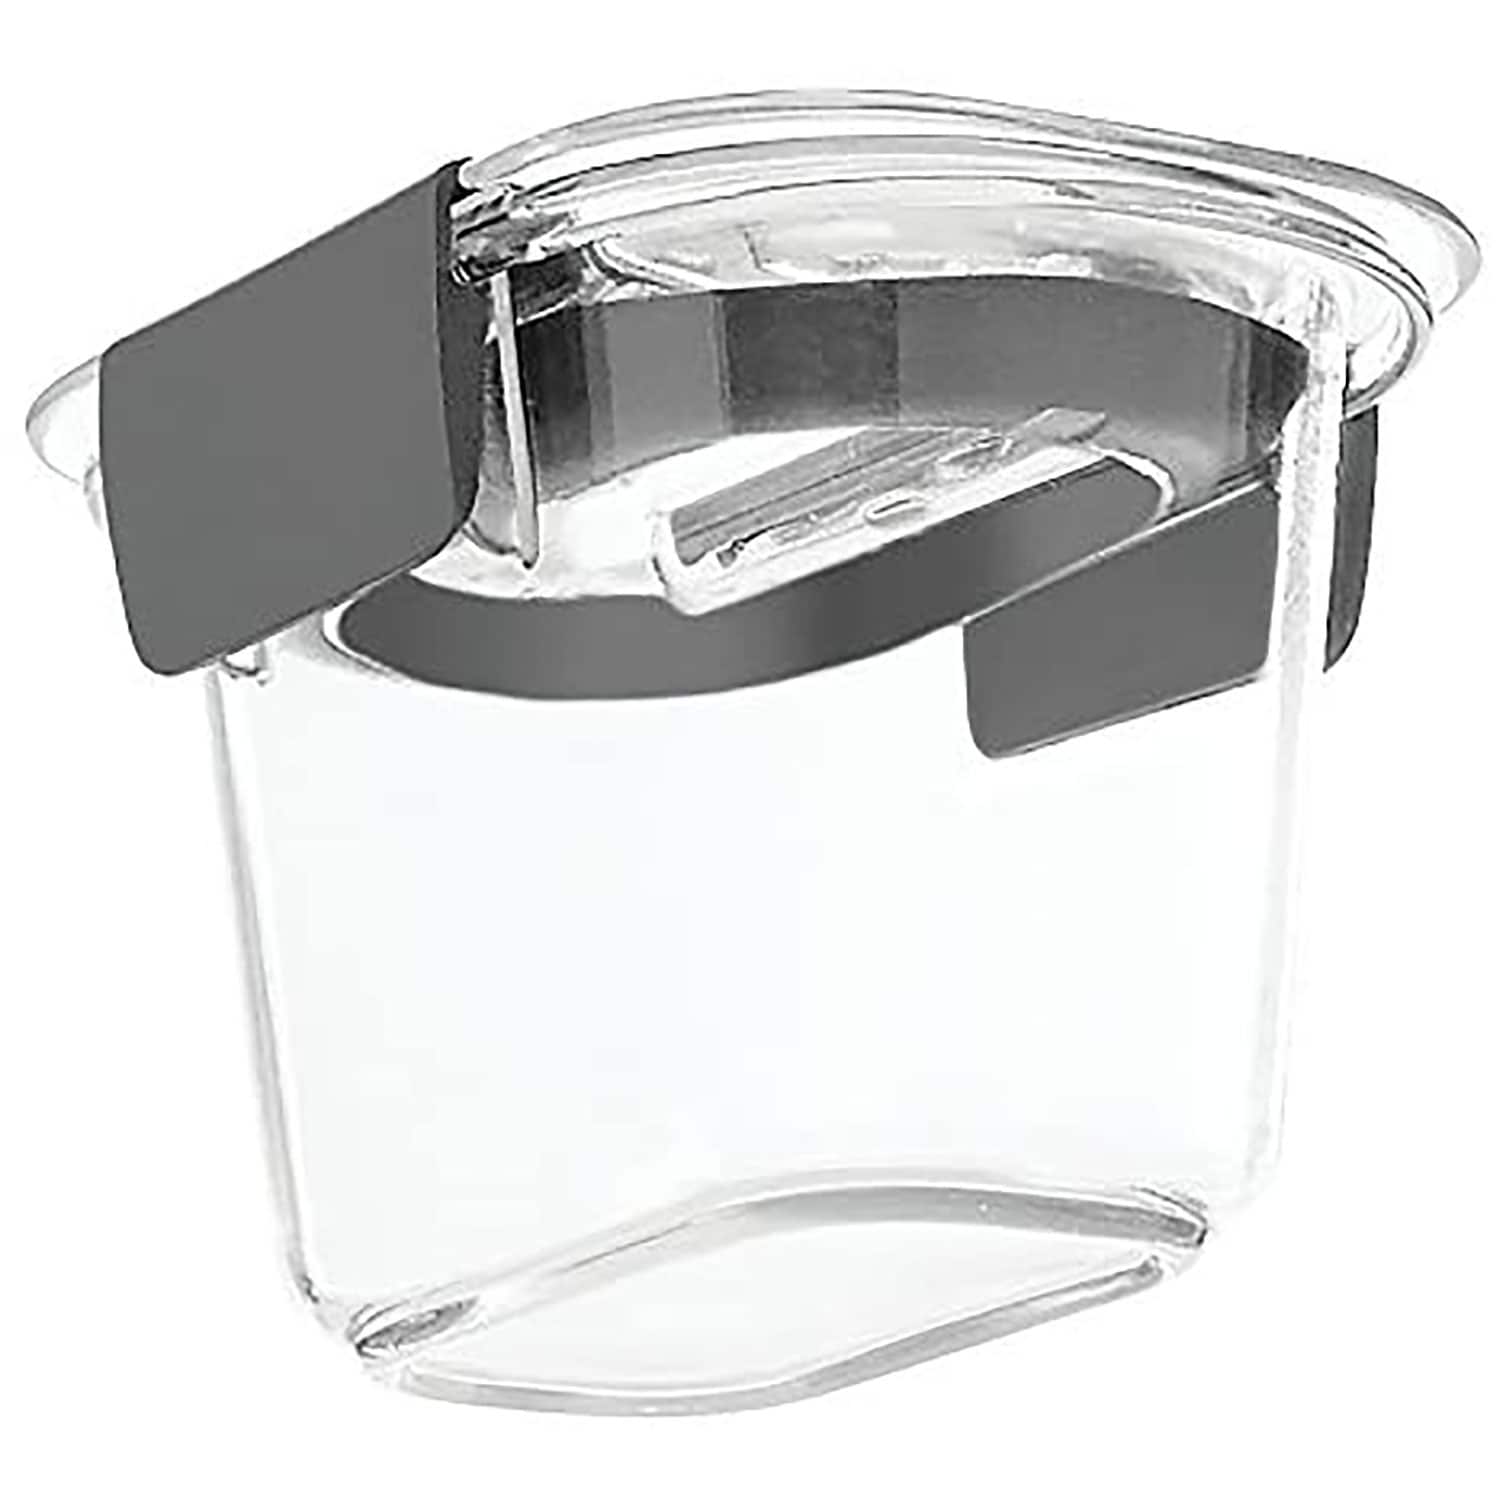 https://ak1.ostkcdn.com/images/products/is/images/direct/d48ab92533b5ffd861dc523d0b026ba6fe6606ac/Rubbermaid-Brilliance-Food-Storage-Container%2C-Mini%2C-0.5-Cup%2C-Clear%2C-2-Pack.jpg